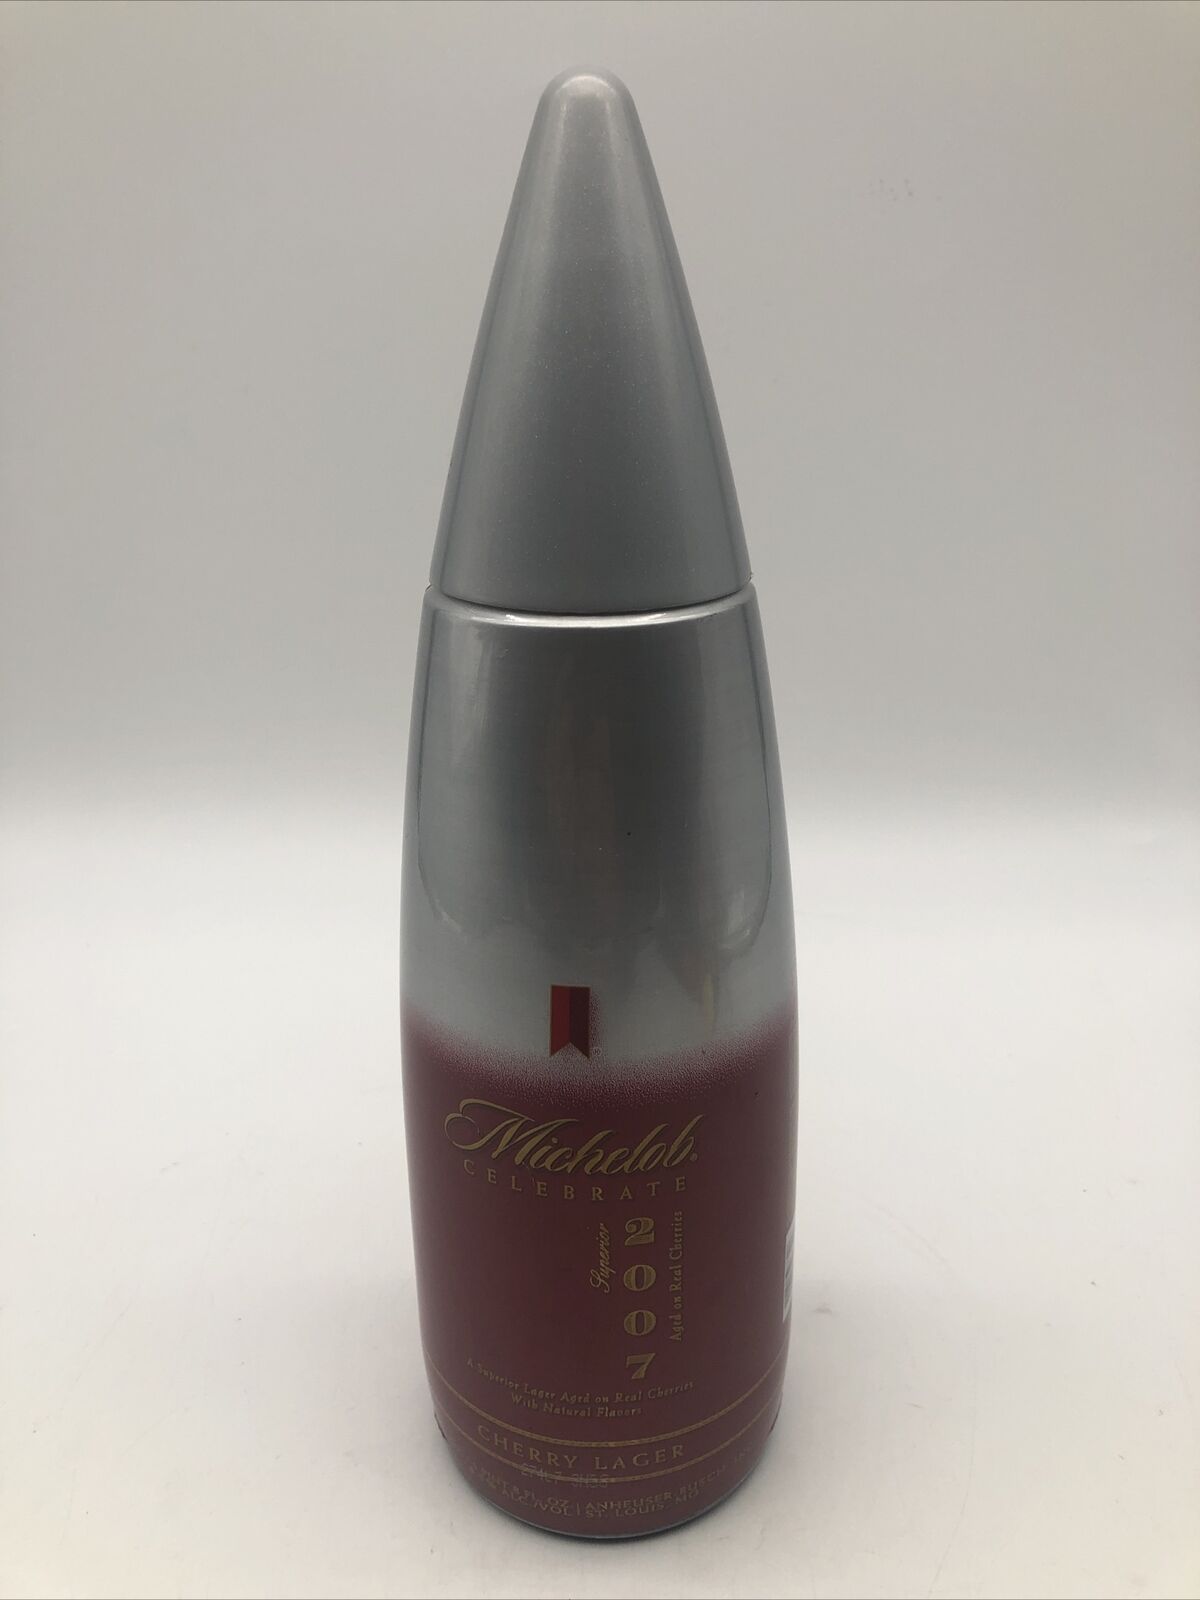 Michelob Celebrate Vintage 2007 Cherry Lager Glass Holiday Bottle Rare